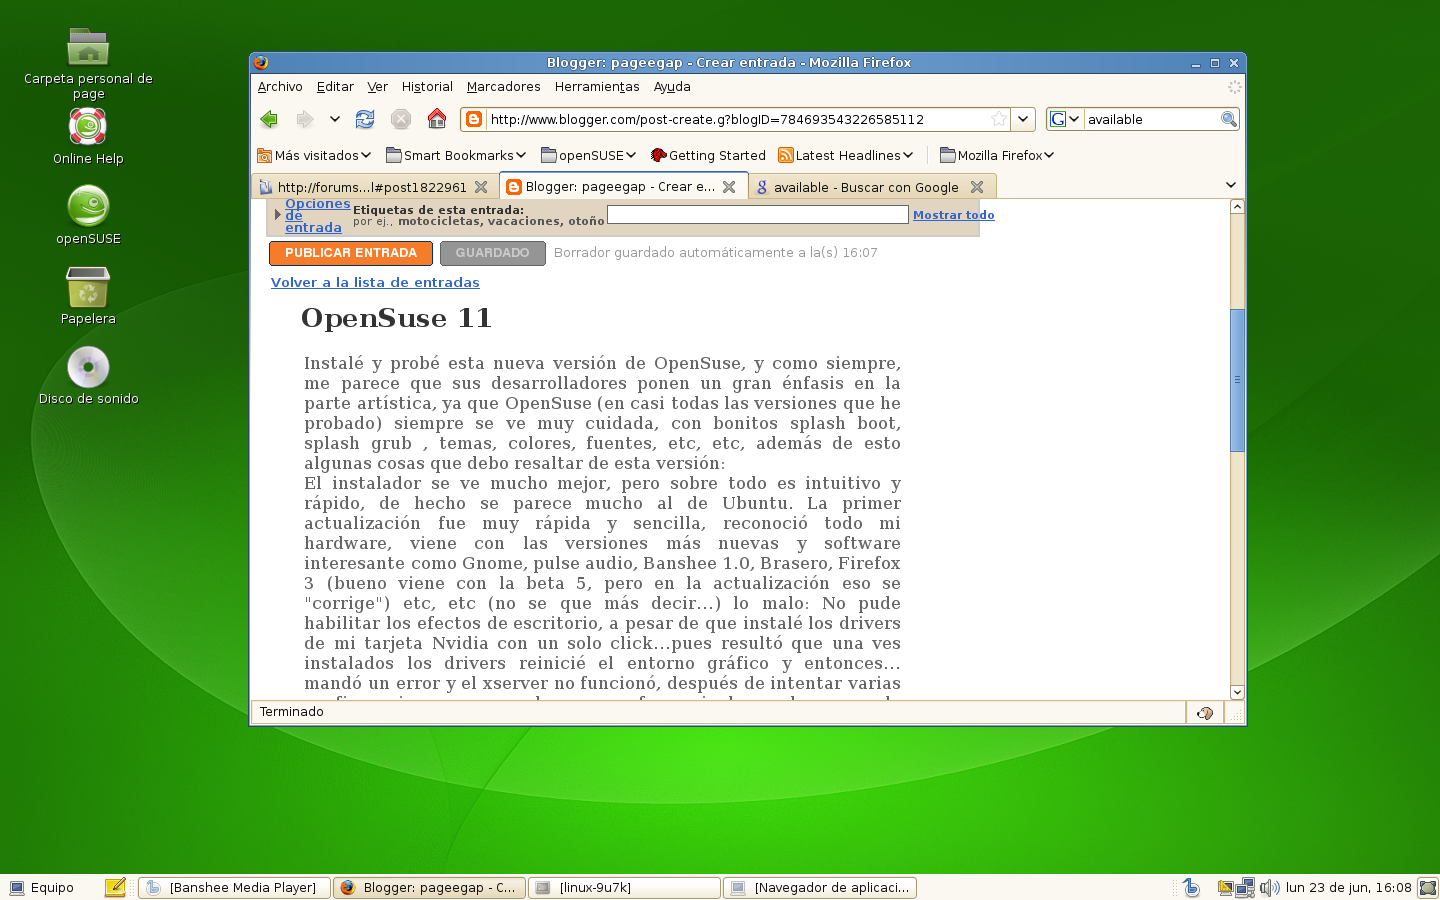 [OpenSuse11.png]